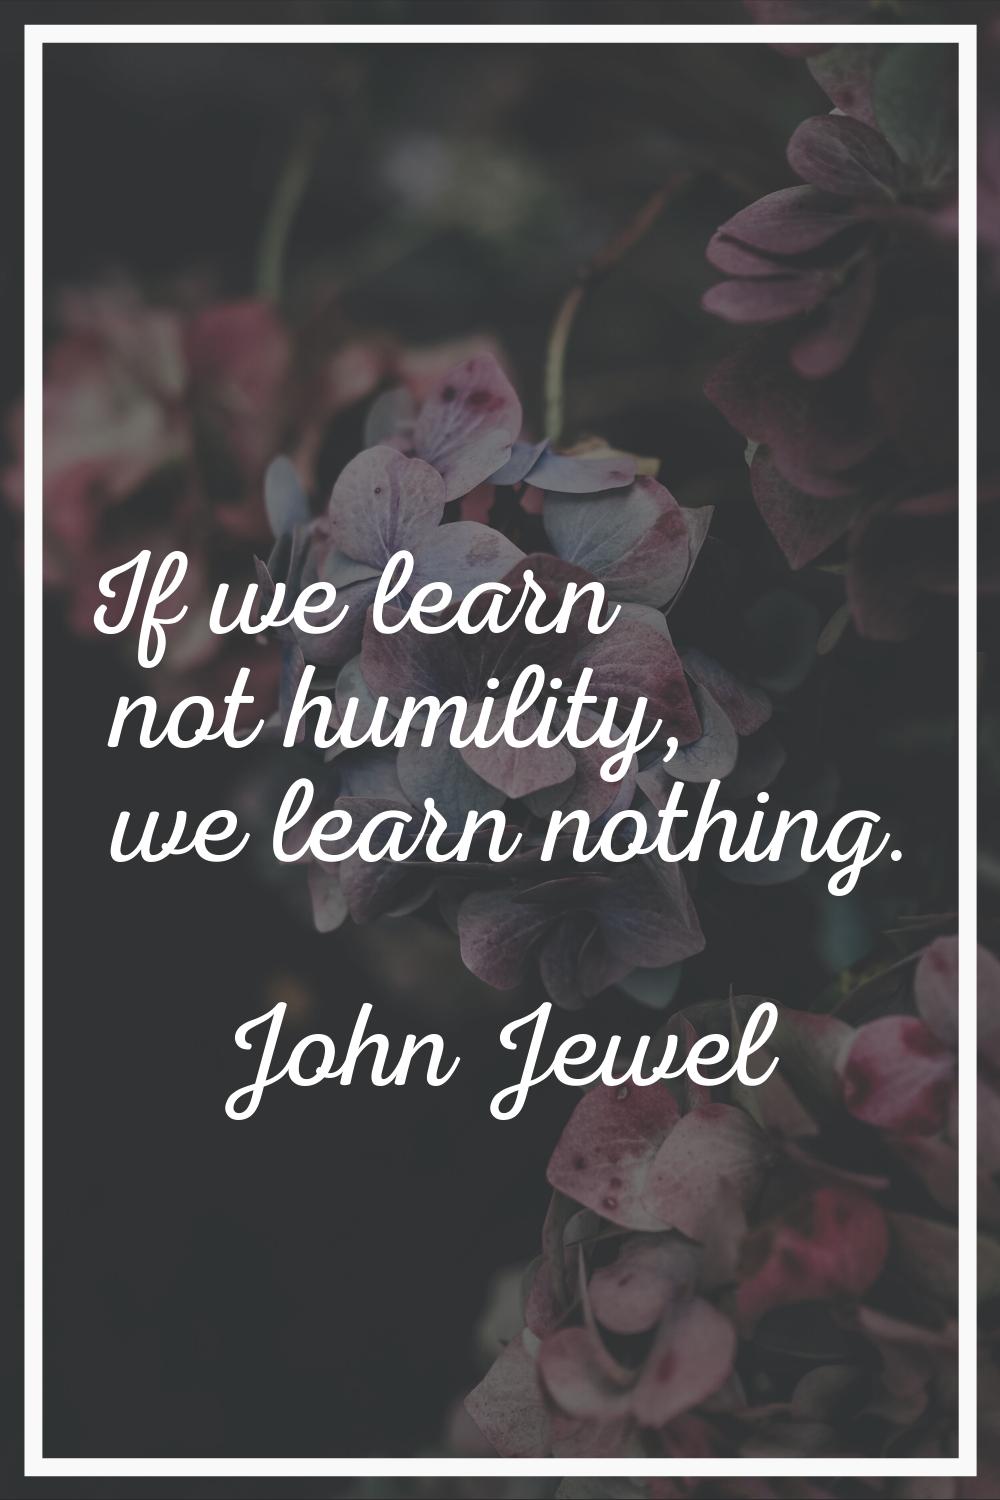 If we learn not humility, we learn nothing.